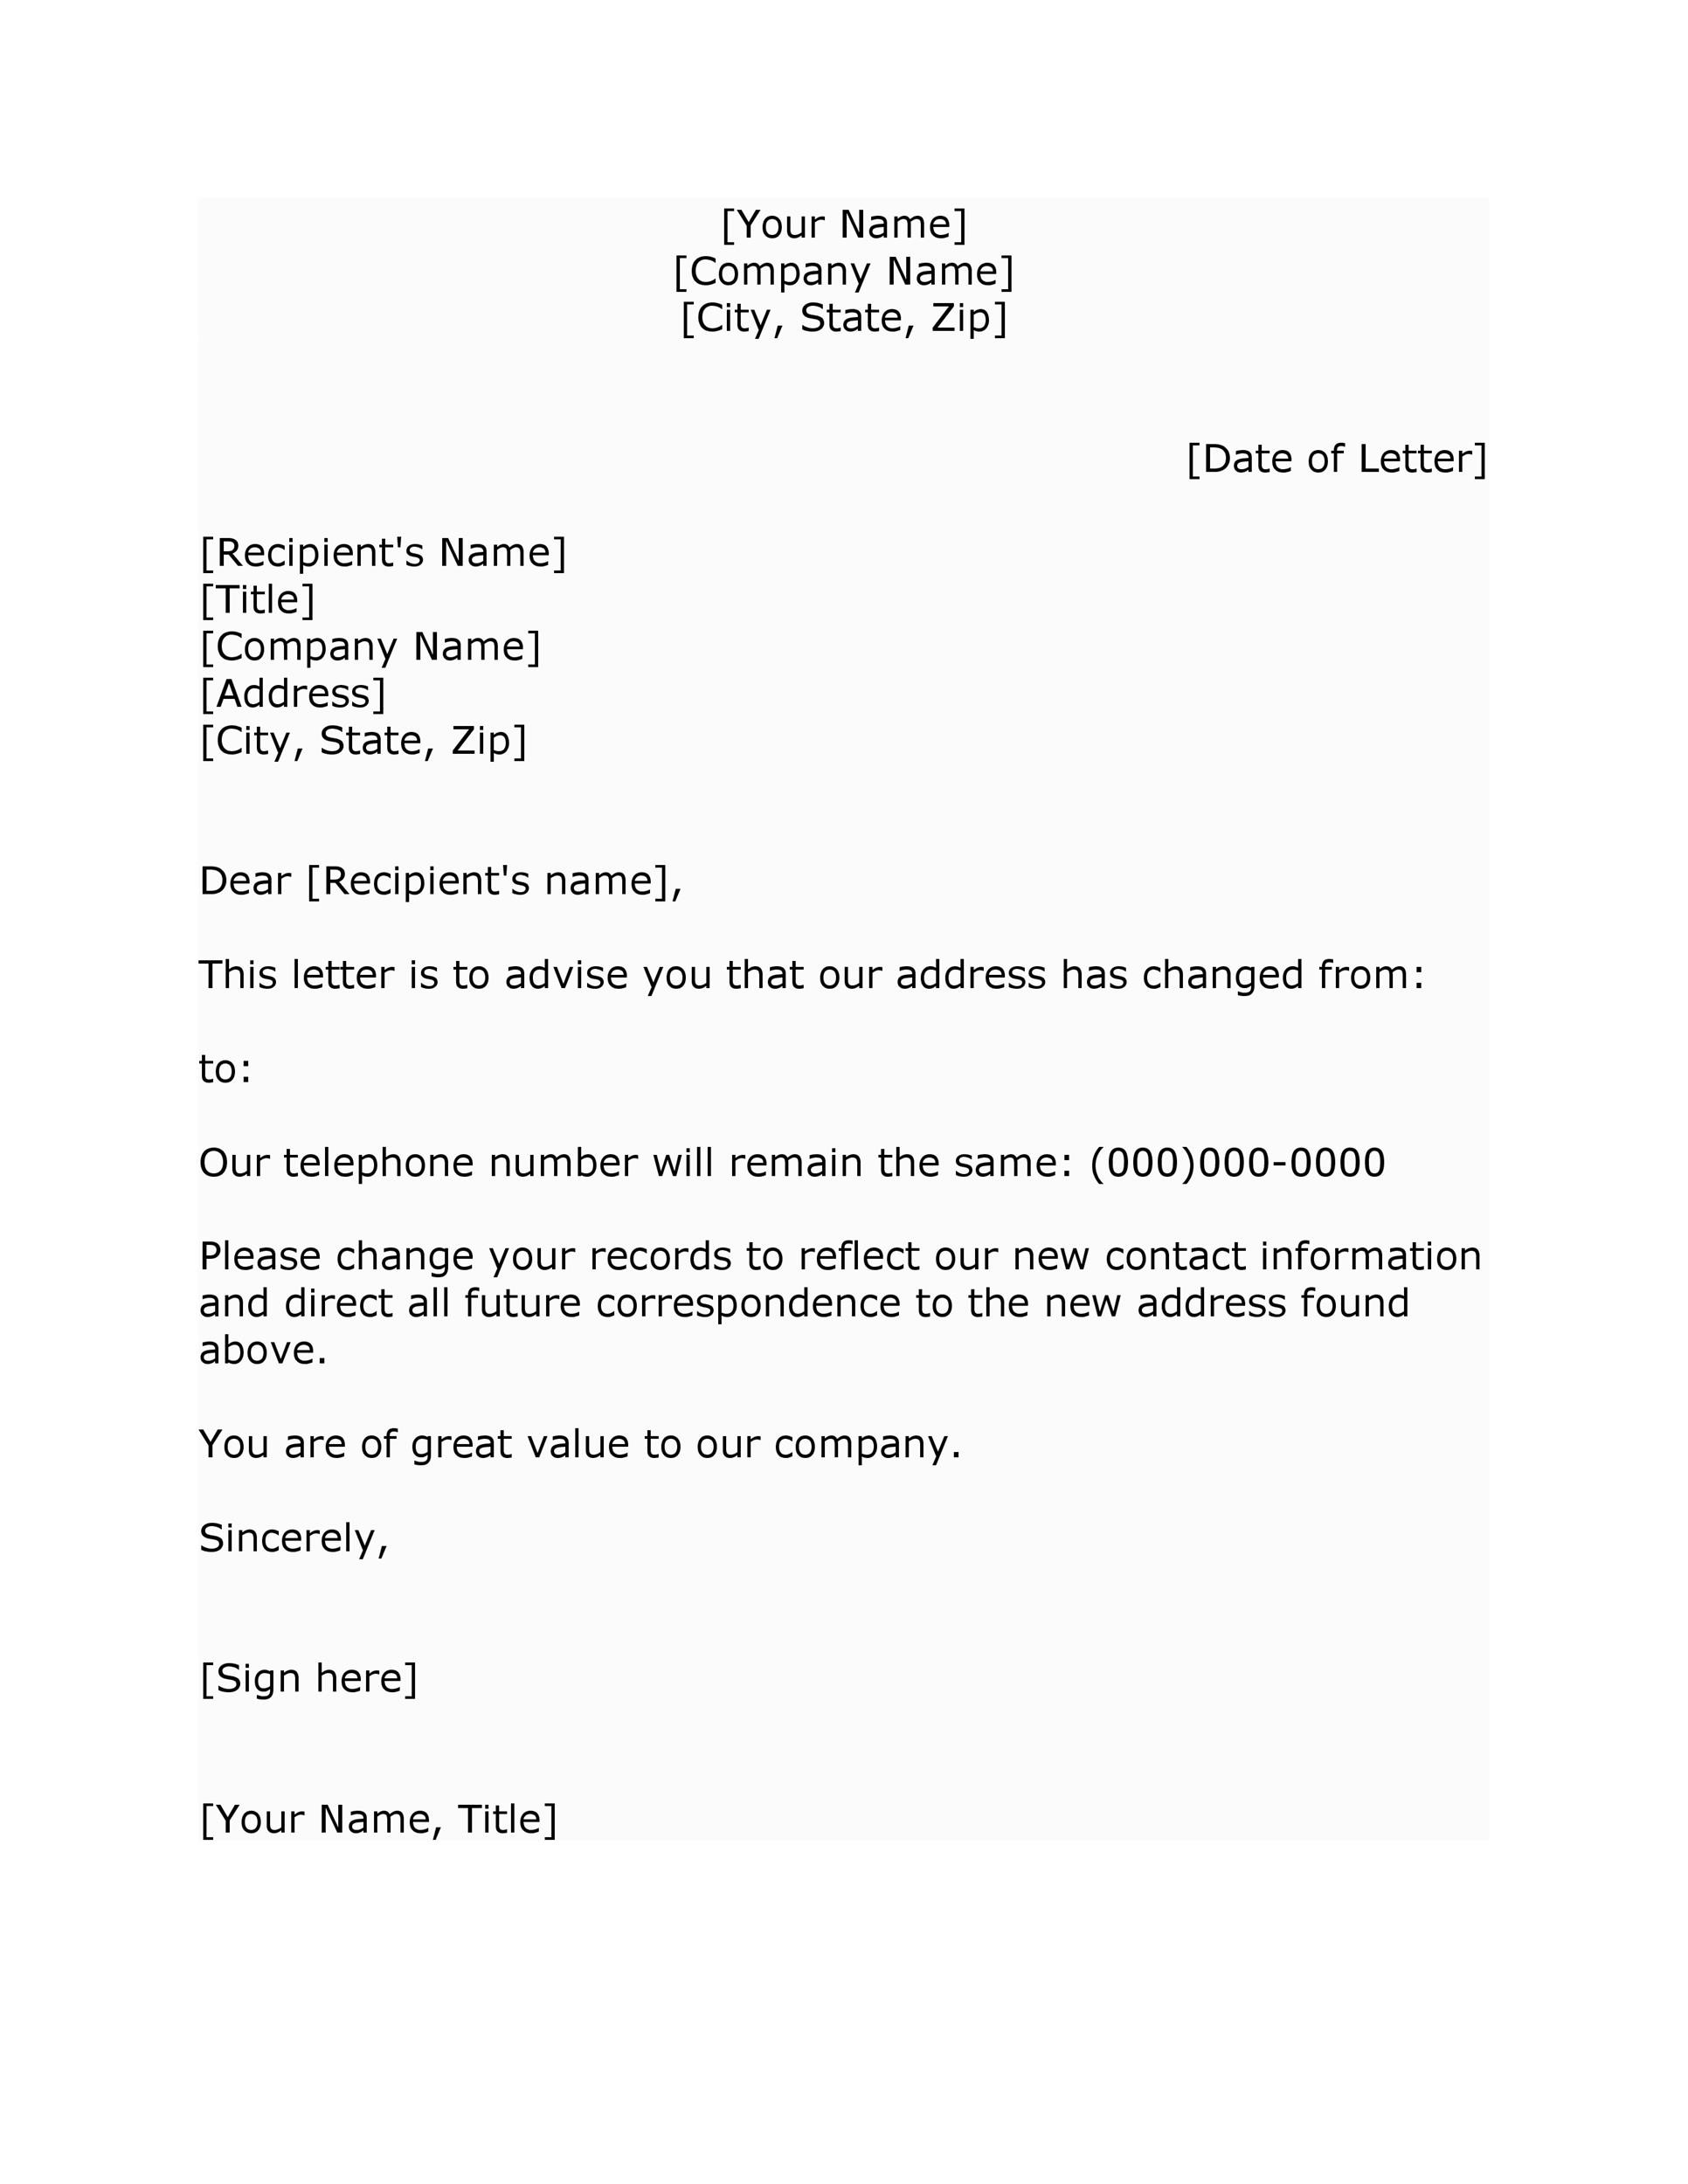 Change Of Address Letter To Clients from templatelab.com